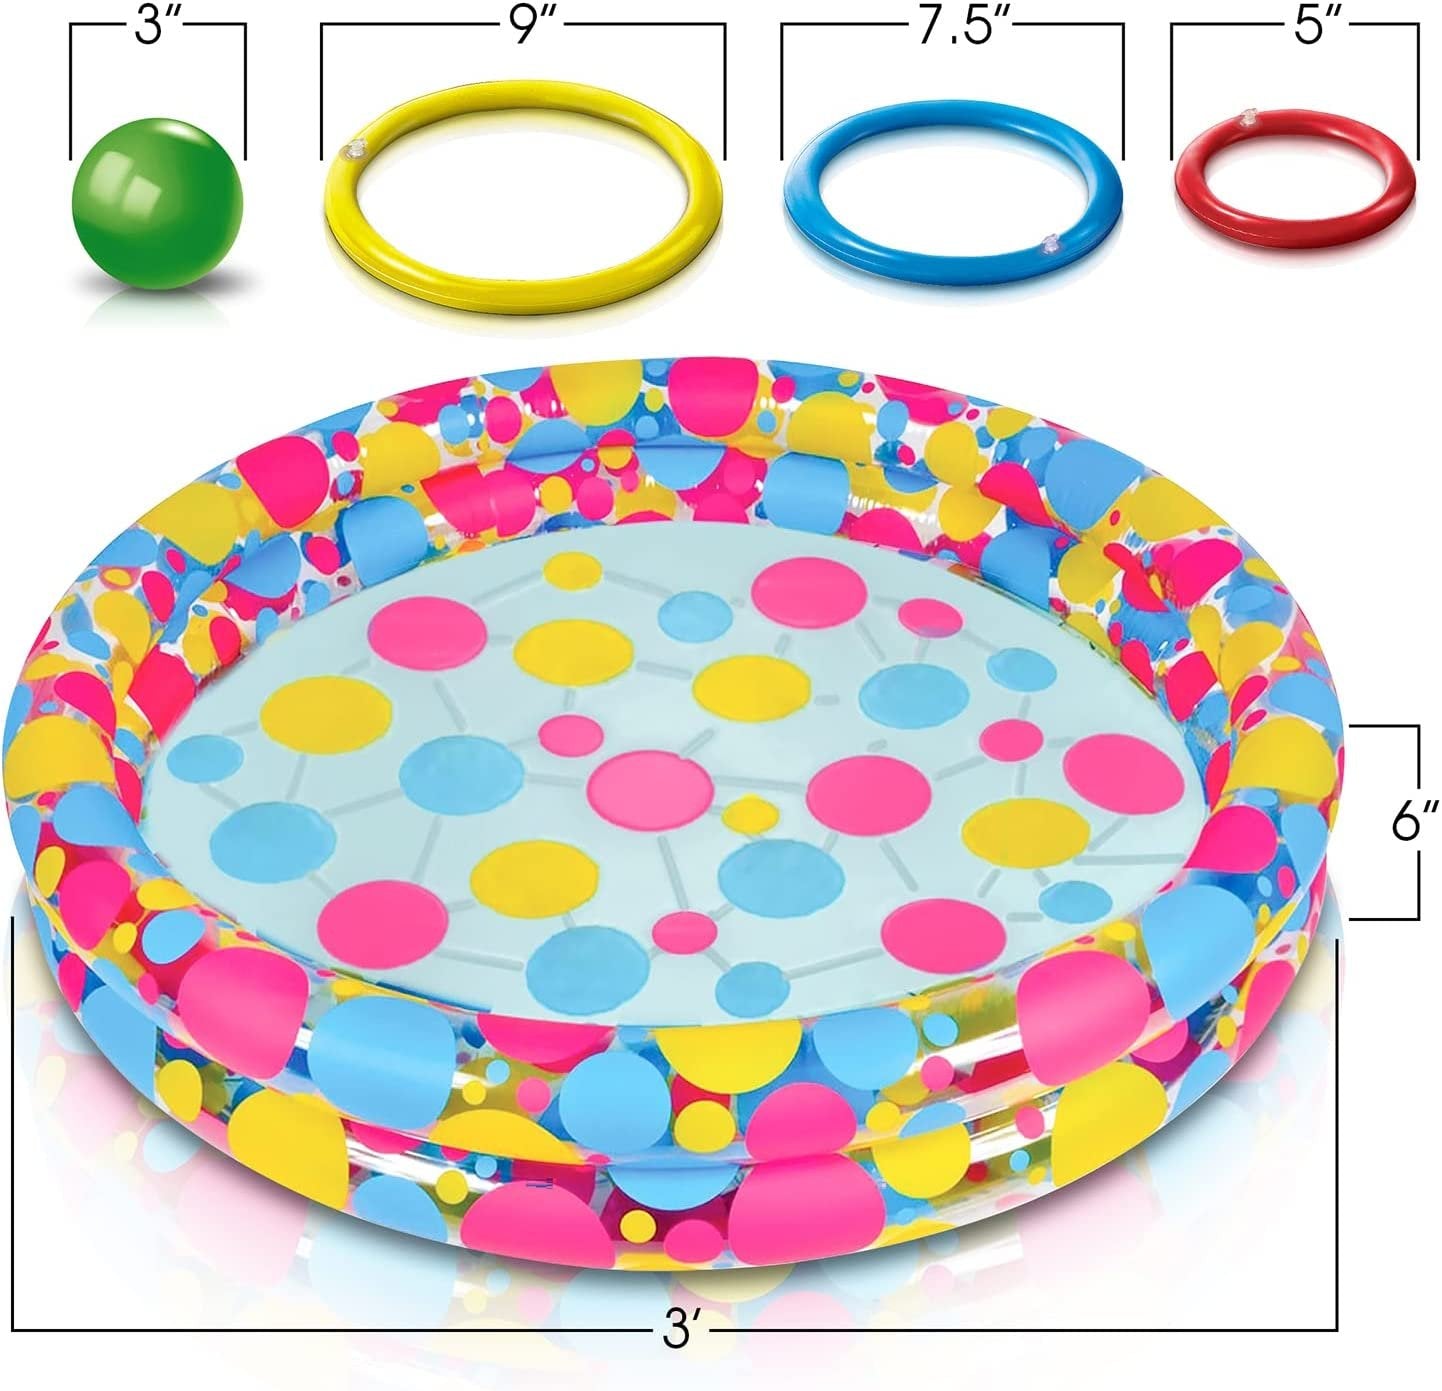 Carnival Ring Toss X Shaped Board Game 5 Rings Sets Indoor Outdoor Play for  Kids - Kotak Sales